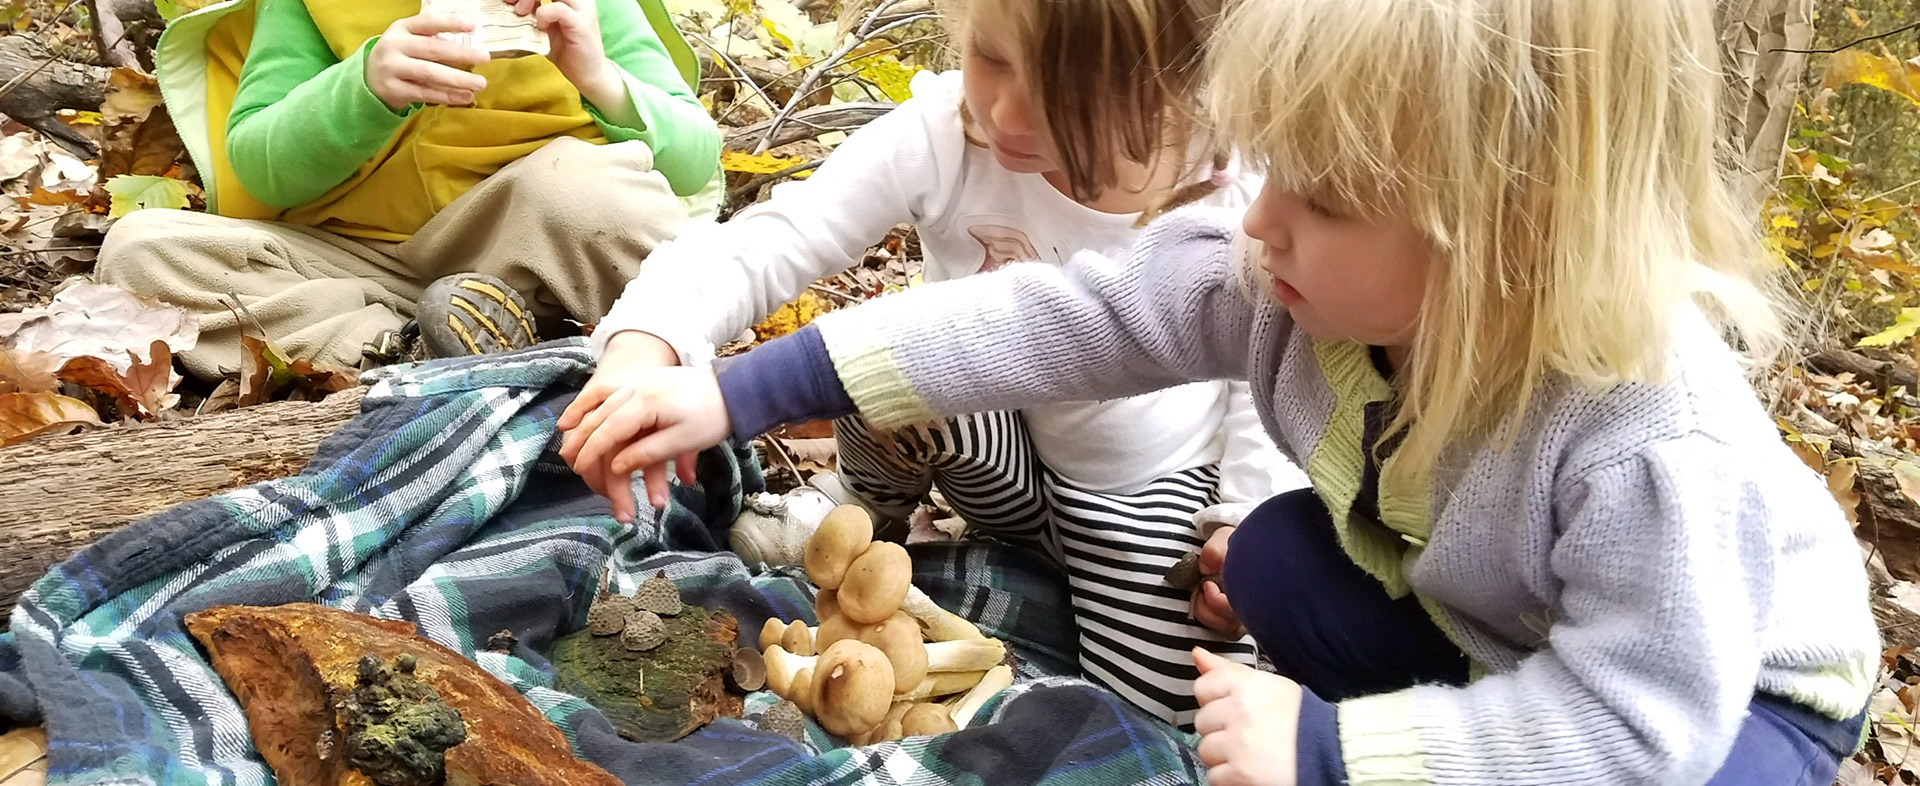 Harvesting edible plants and mushrooms during Asheville nature connection homeschool program